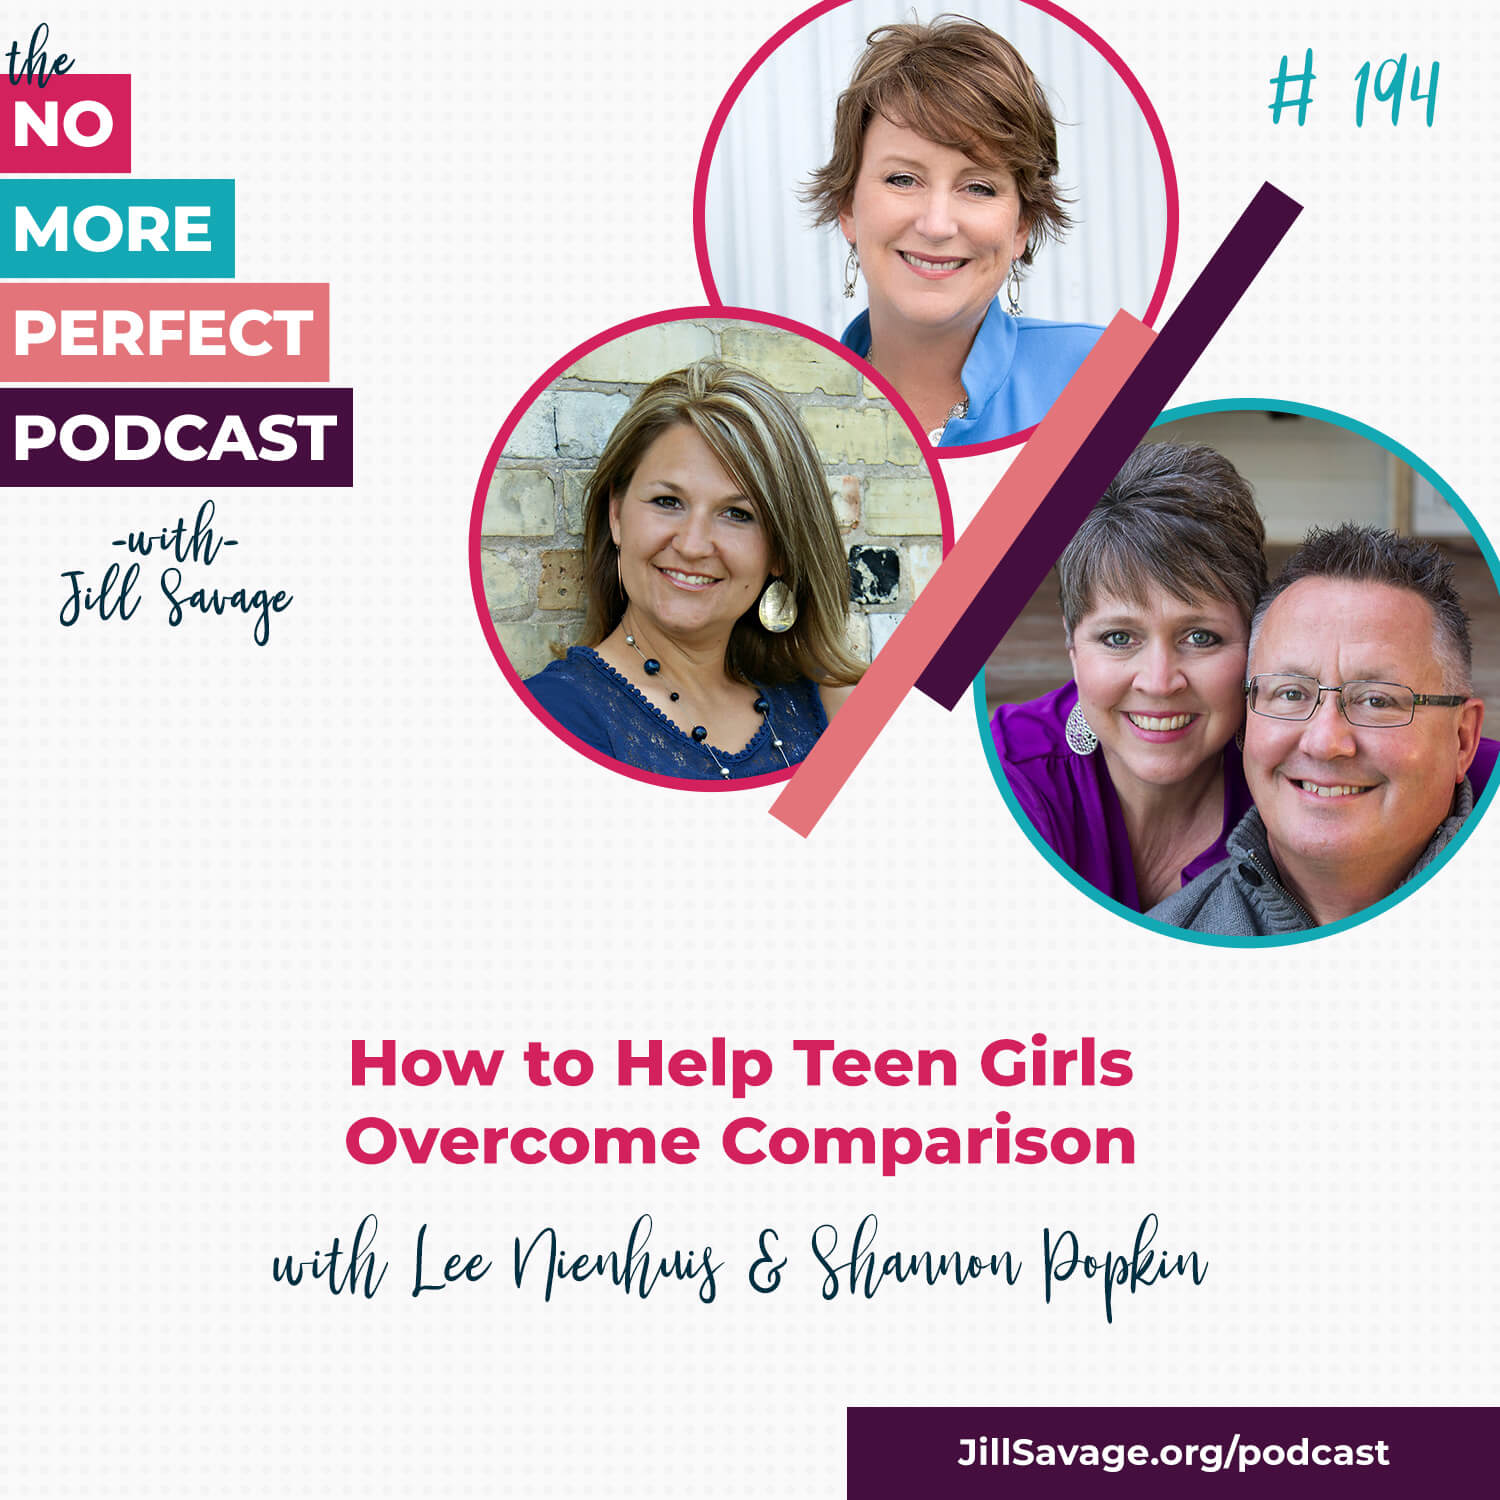 How to Help Teen Girls Overcome Comparison with Lee Nienhuis & Shannon Popkin | Episode 194